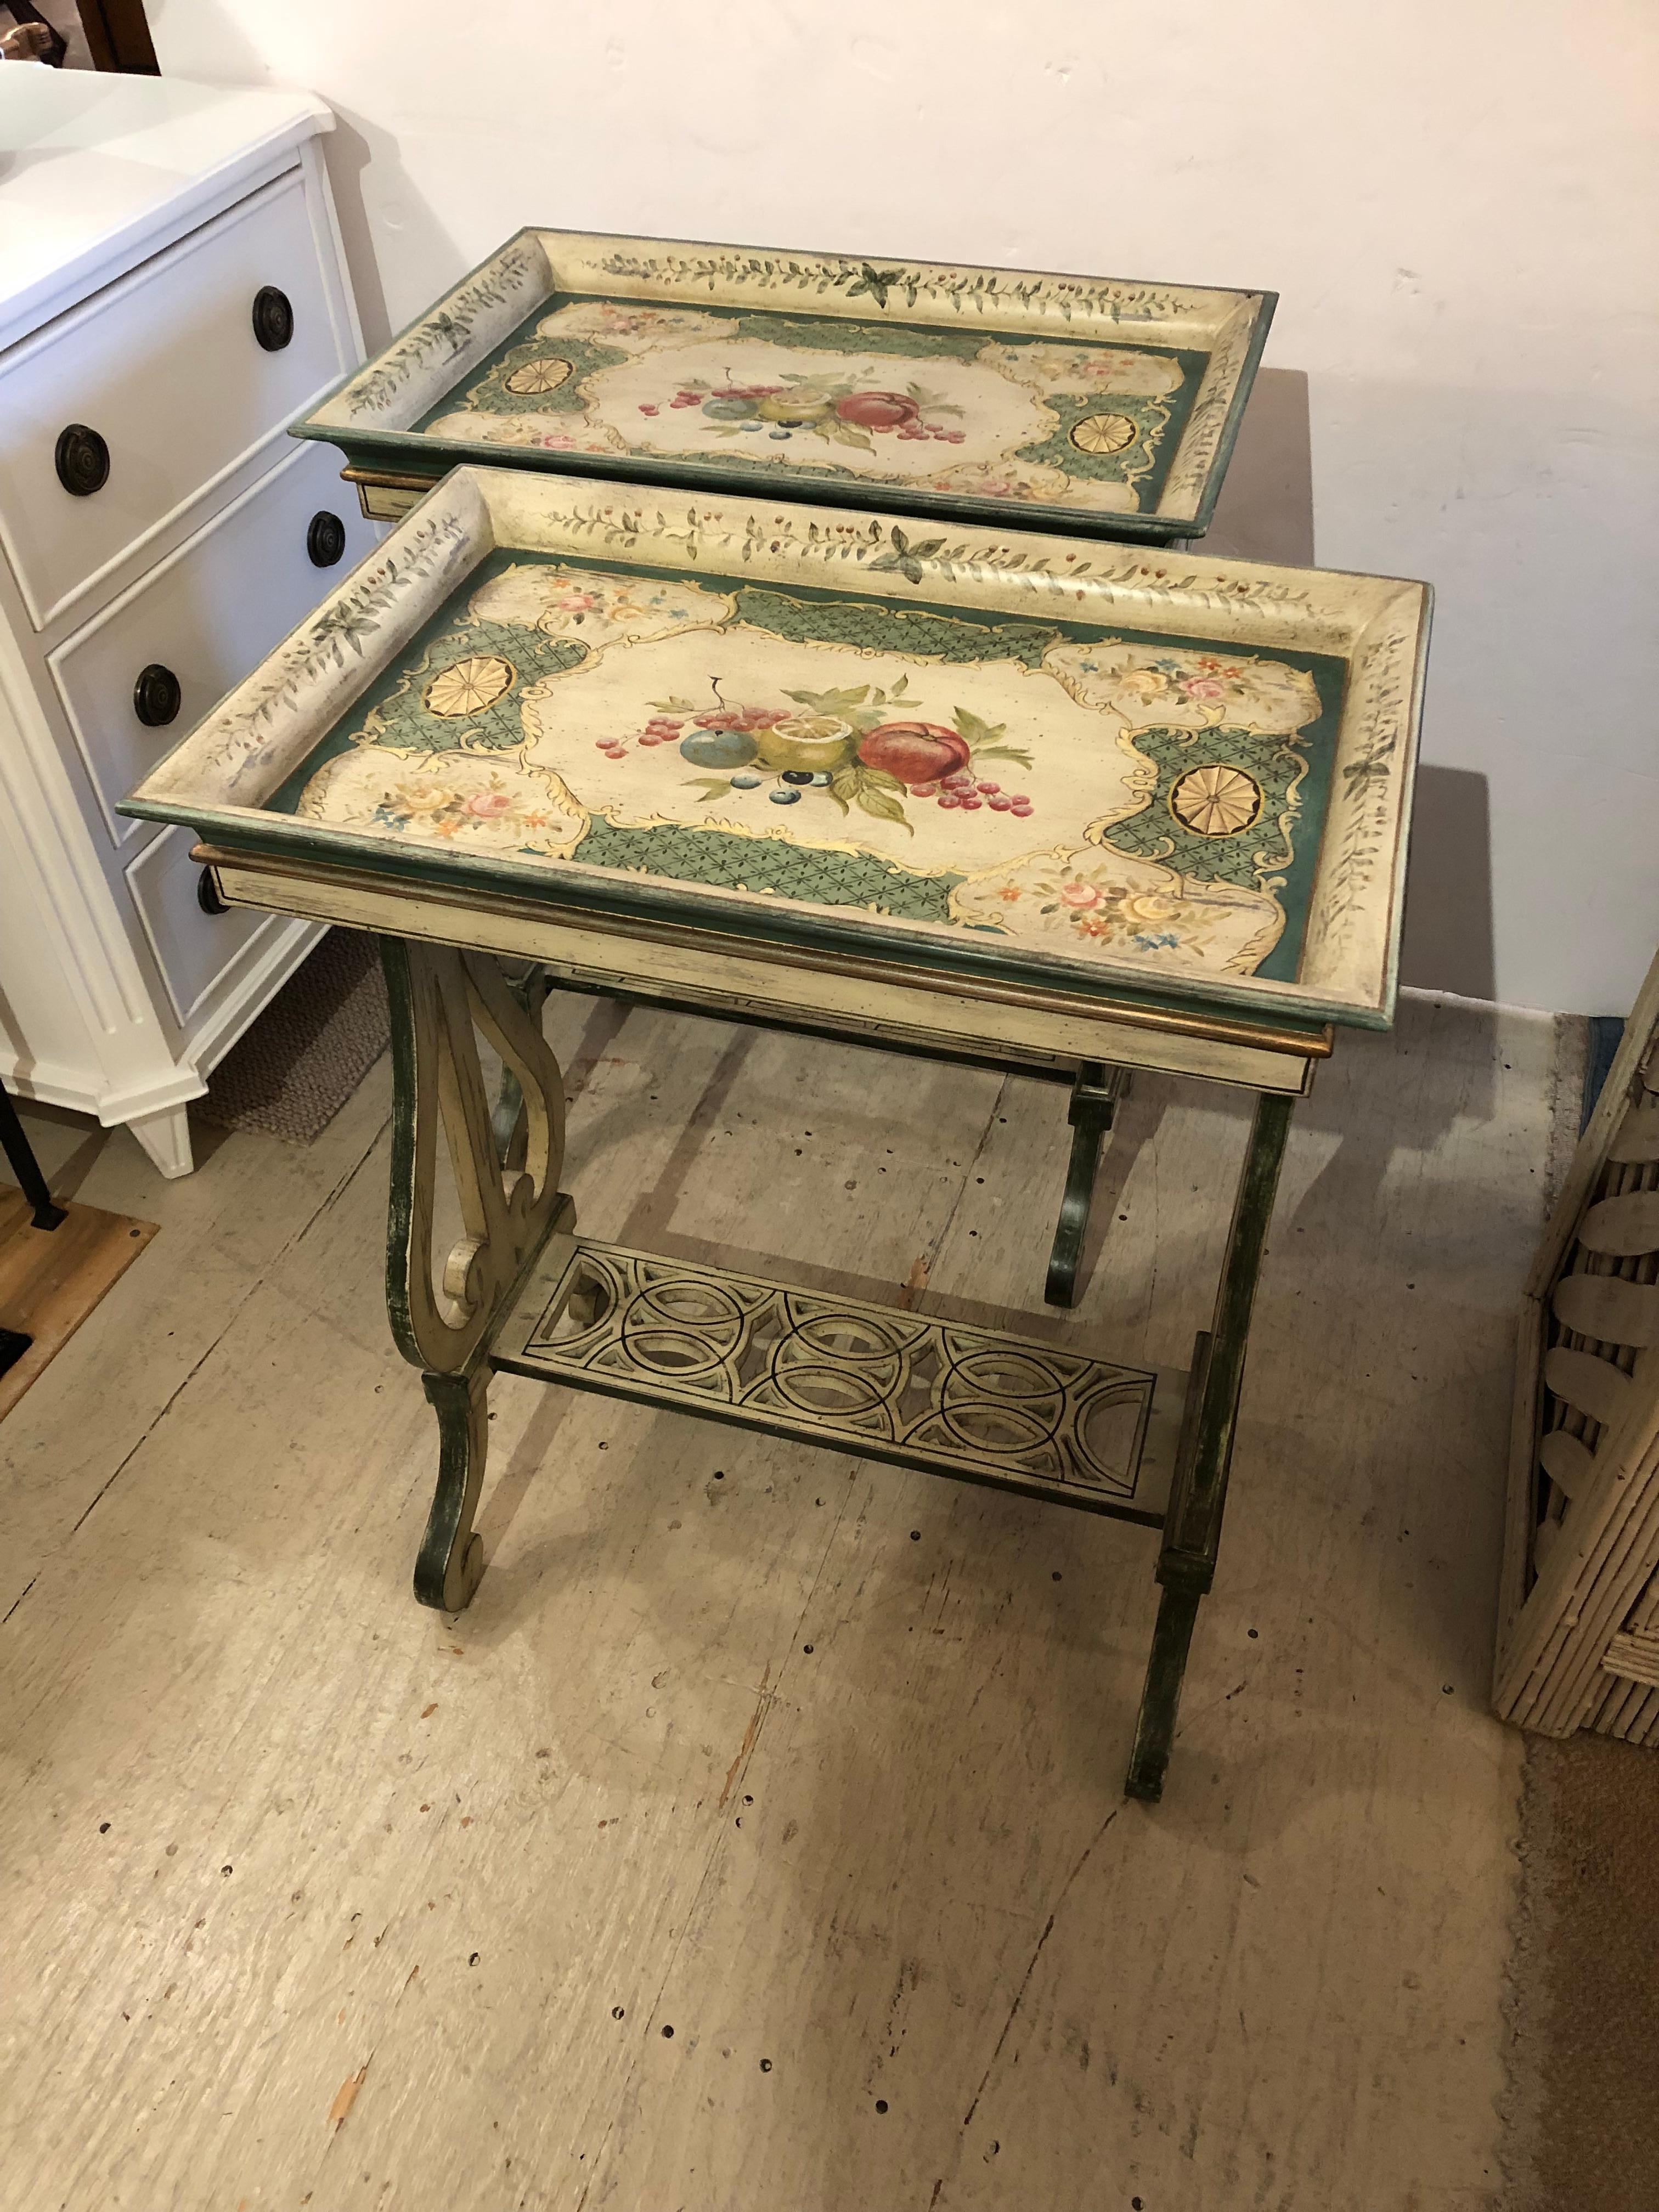 A matching pair of painted rectangular side tables having lyre shaped legs and fretwork lower tier. Color palette is a refreshing neutral blend of green, cream and pink.